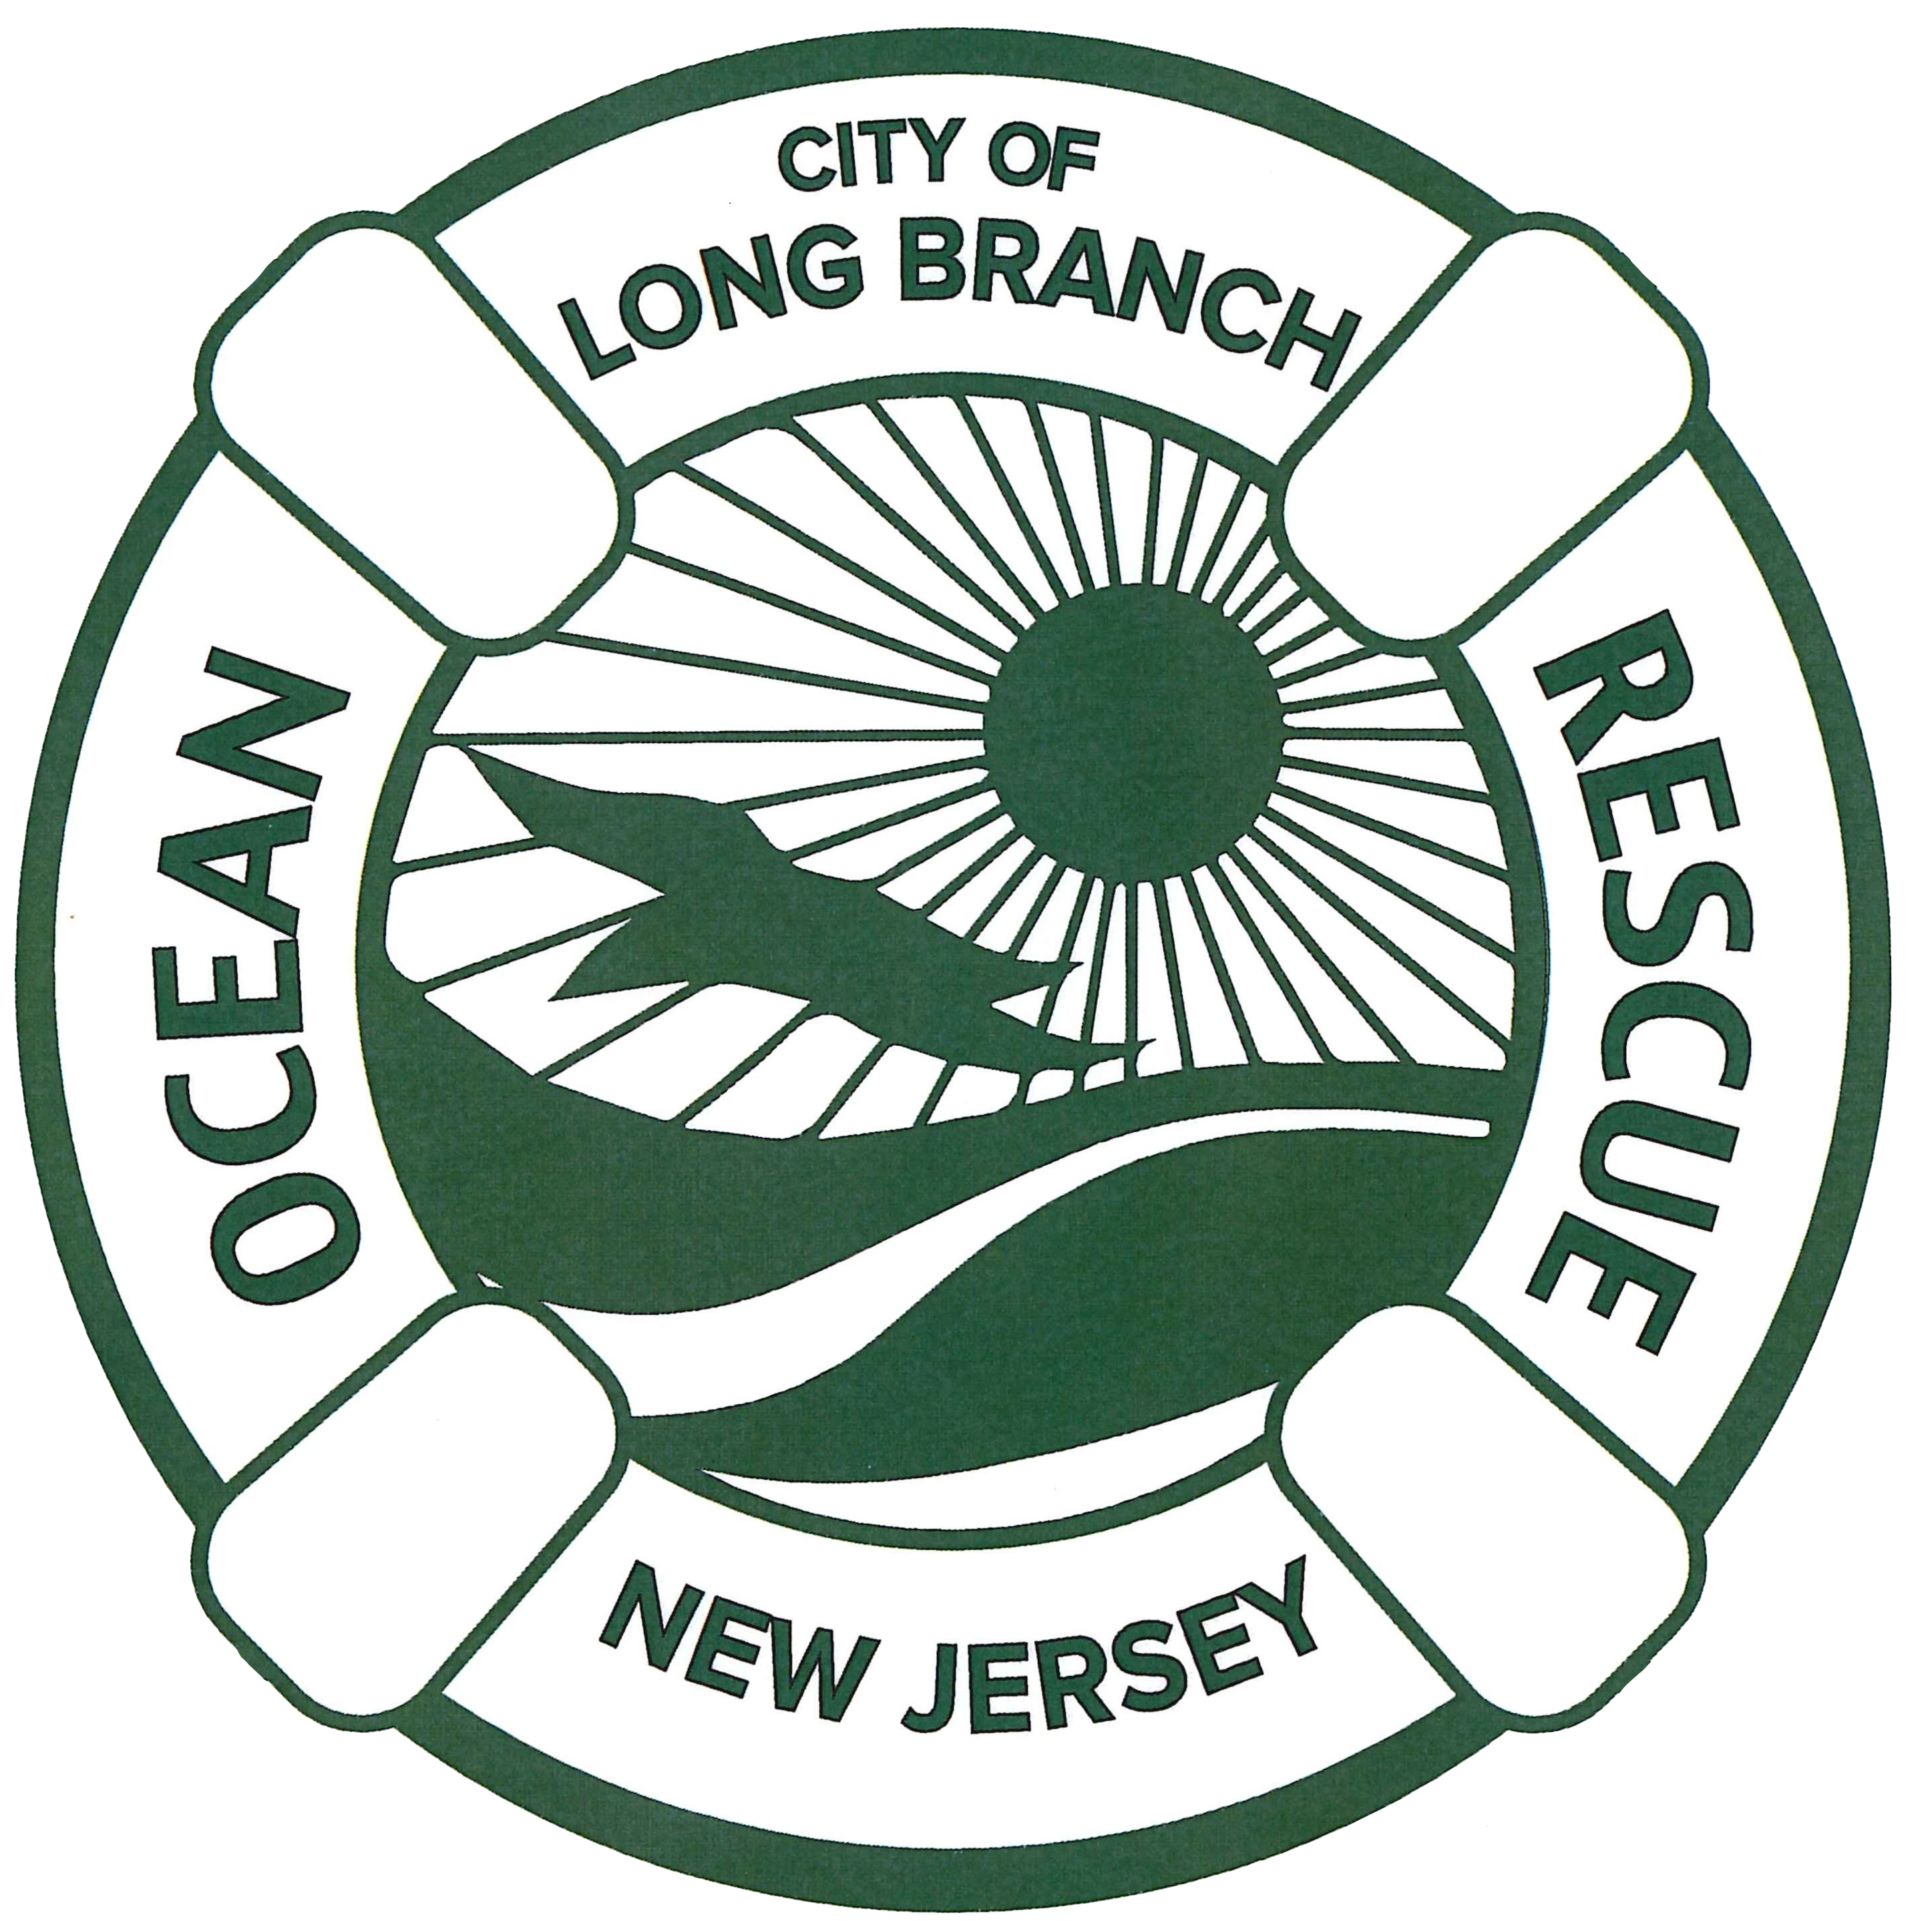 Long Branch, New Jersey ZIP Code - United States